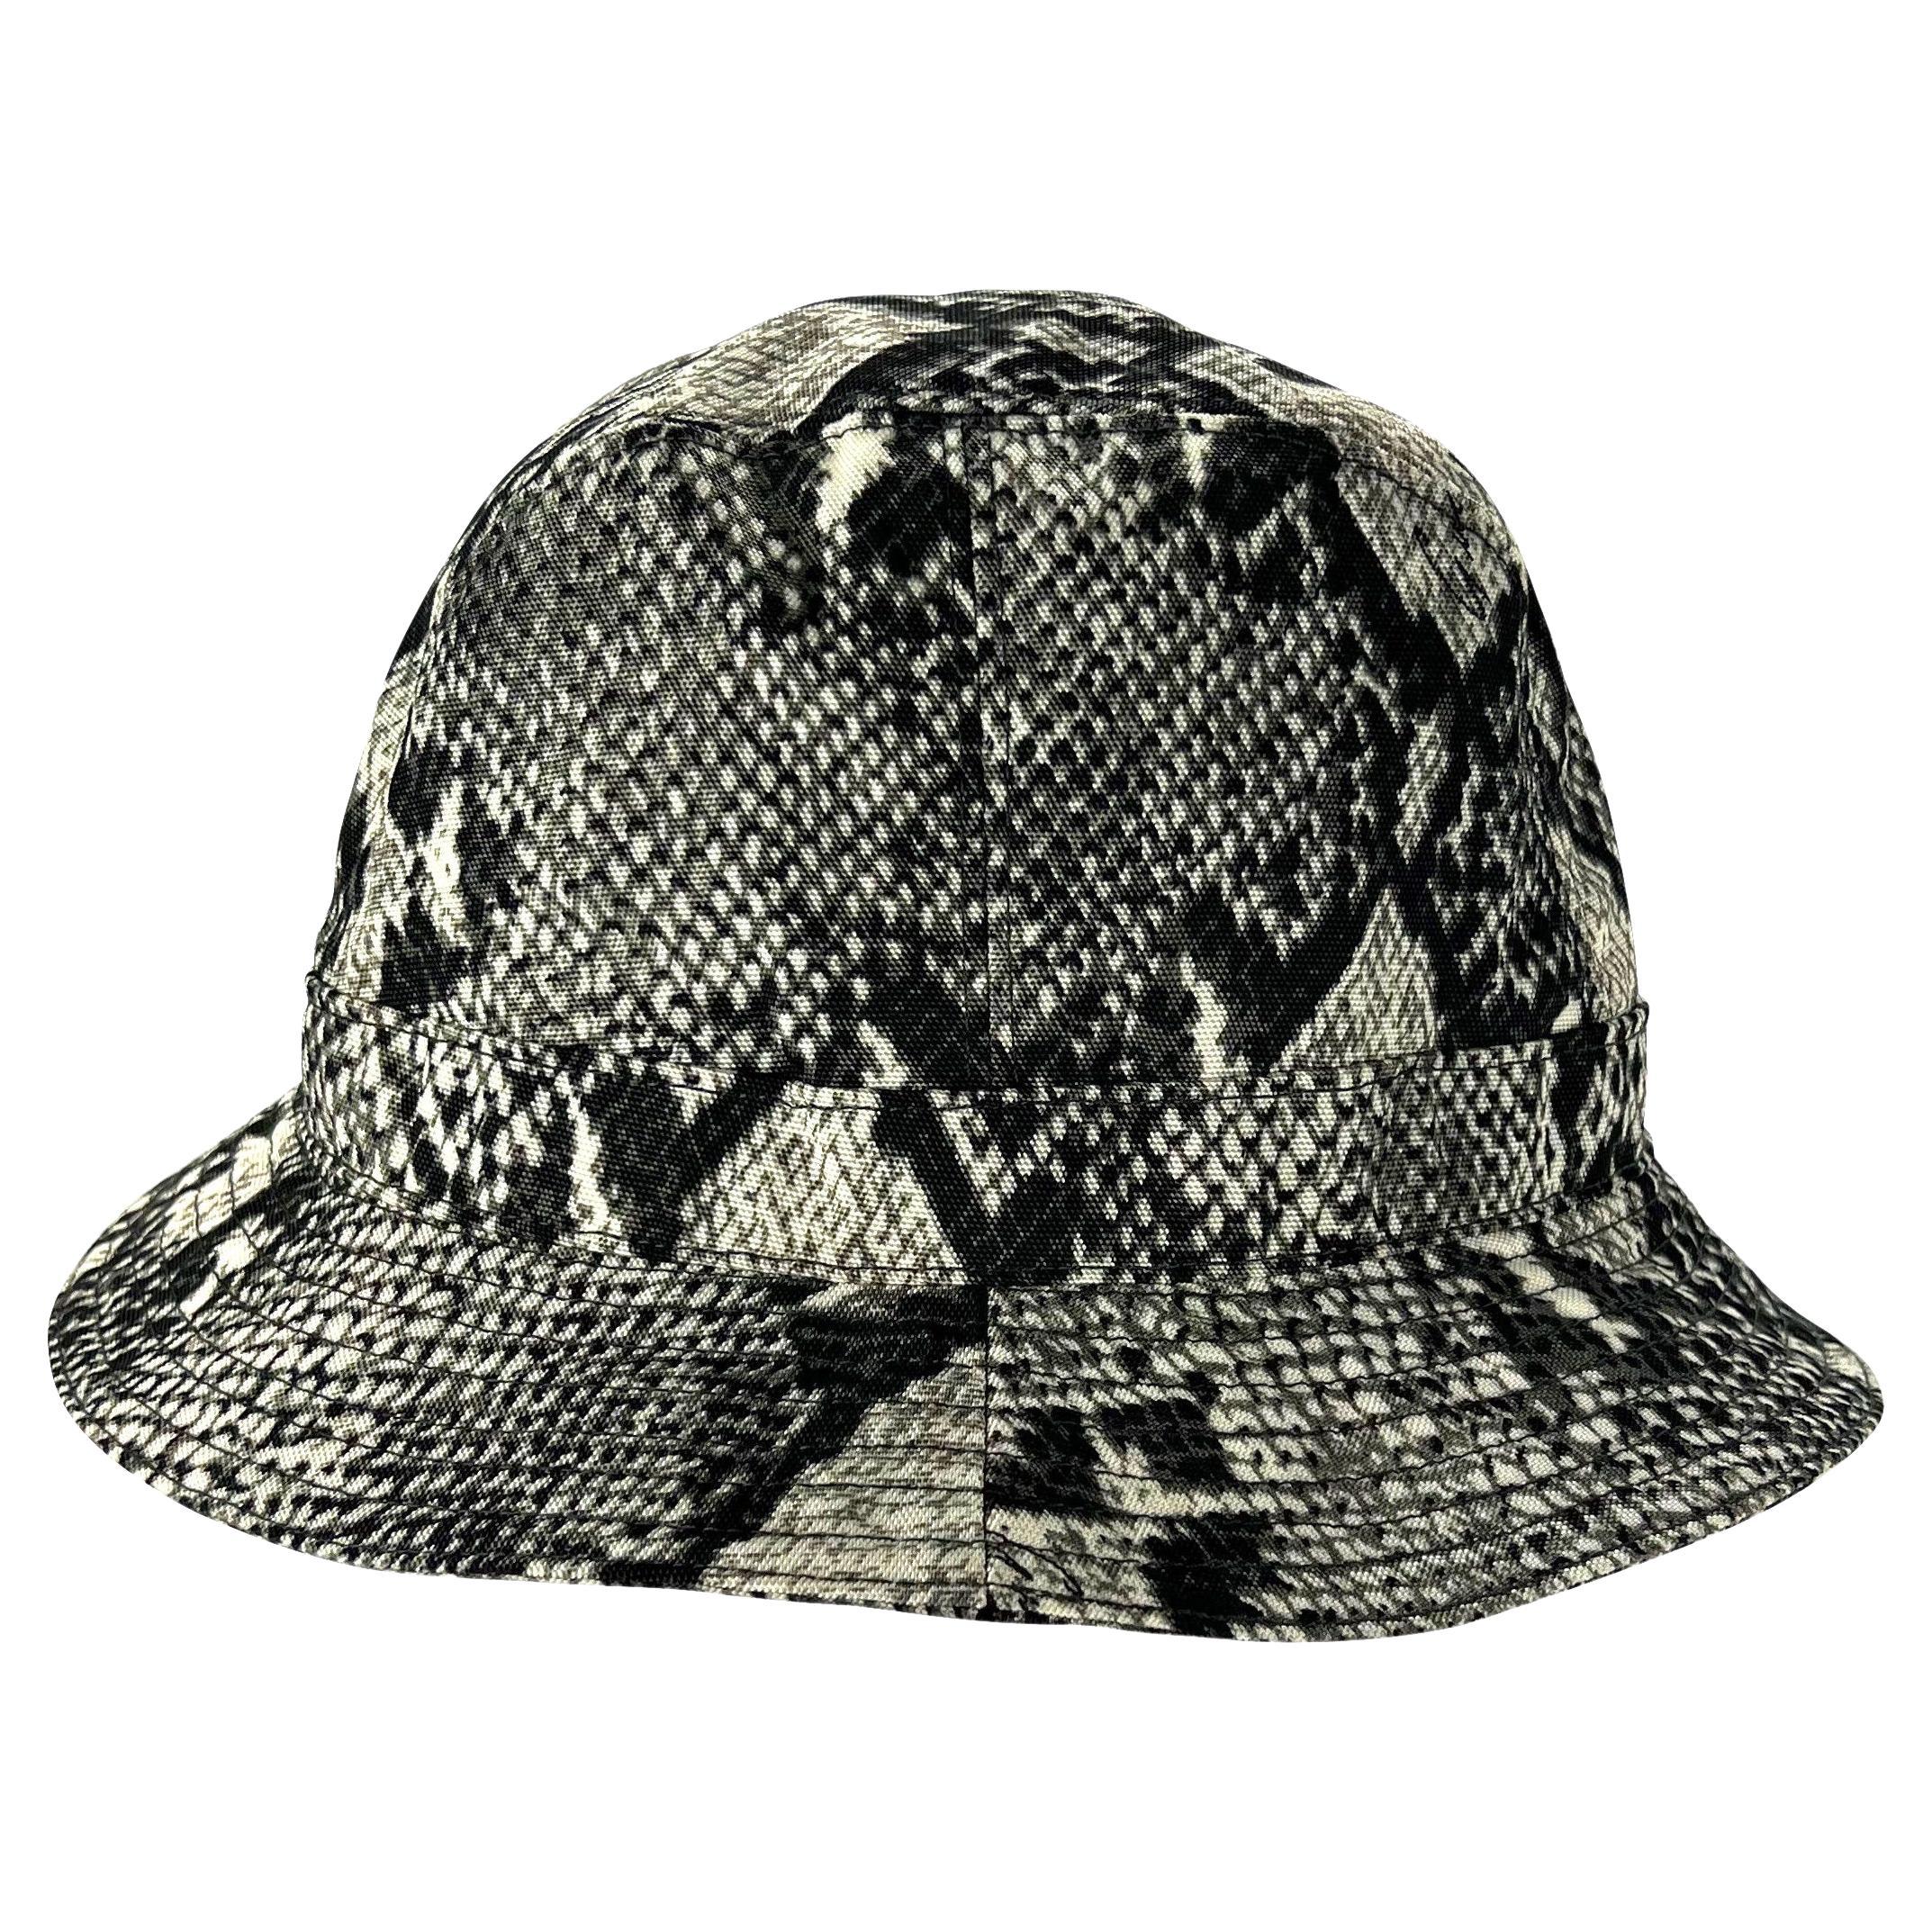 S/S 2000 Gucci by Tom Ford Snakeskin Print Grey Nylon Bucket Hat In Excellent Condition For Sale In Philadelphia, PA